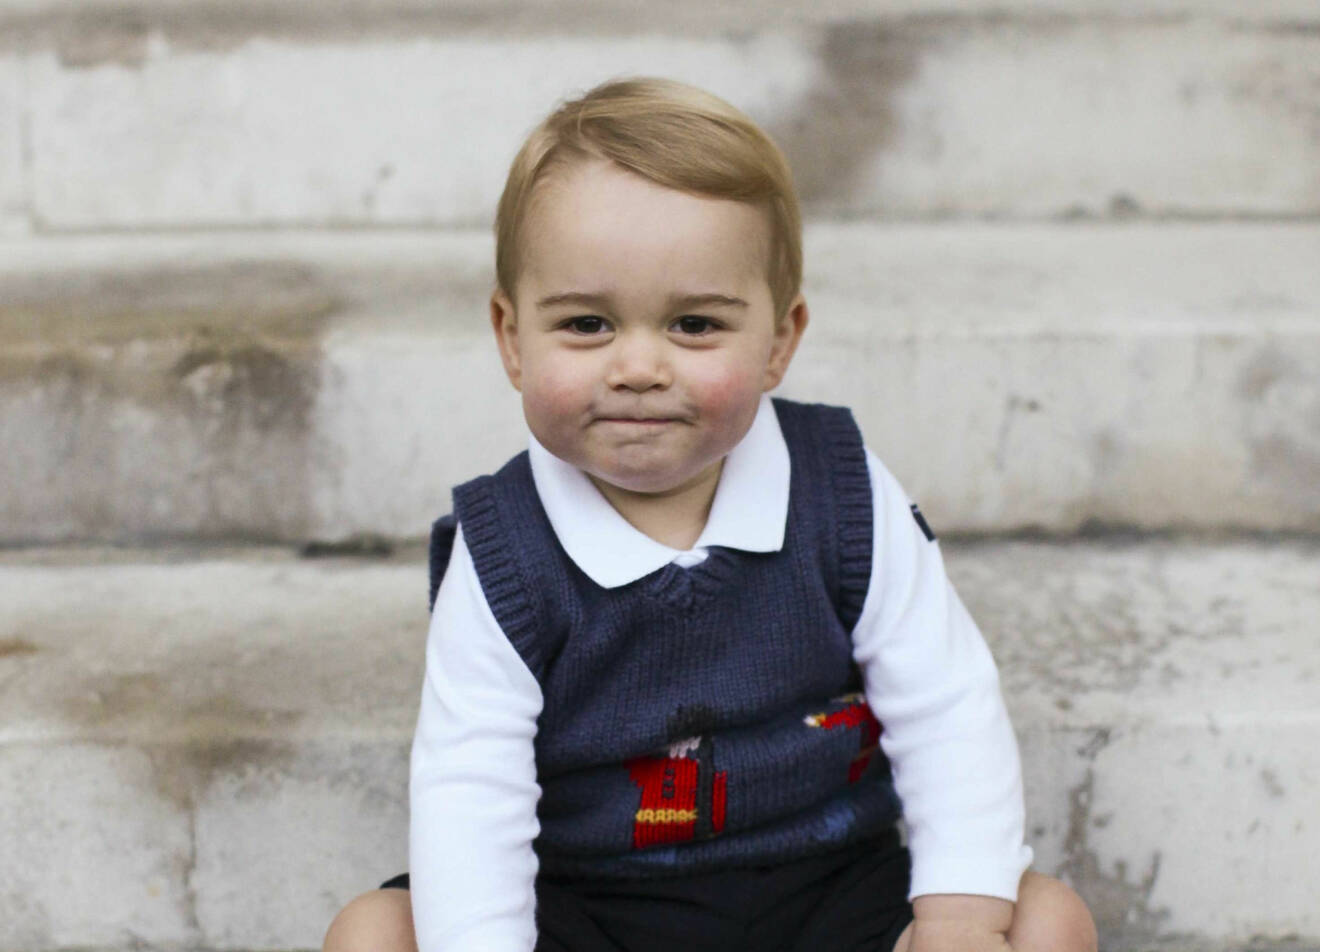 13 December 2014. The Duke and Duchess of Cambridge have released three official Christmas photographs of Prince George. The photographs were taken in late November, and show Prince George in a courtyard at Kensington Palace. Credit: The Duke & Duchess of Cambridge/Ken Goff Rota/GoffPhotos.com Ref: KGC-375 Terms of Release which MUST be adhered to without exception: 1. Copyright in the photographs vest in TRH The Duke and Duchess of Cambridge. 2. These photographs are being made available to Ken Goff by way of licence on condition that: a) they shall be embargoed for use until 22.30hrs GMT on Saturday, 13th December 2014. b) The photographs shall be strictly for editorial use only. c) No charge should be made for the supply, release or publicationn of the photographs. d) There shall be no commercial use whatsoever of the photographs (including any use in merchandising, advertising or any other non-editorial use). **No UK Sales Until 28 Days After Create Date** 13 December 2014. The Duke and Duchess of Cambridge have released three official Christmas photographs of Prince George. The photographs were taken in late November, and show Prince George in a courtyard at Kensington Palace. Credit: The Duke & Duchess of Cambridge/Ken Goff Rota/GoffPhotos.com Ref: KGC-375 Terms of Release which MUST be adhered to without exception: 1. Copyright in the photographs vest in TRH The Duke and Duchess of Cambridge. 2. These photographs are being made available to Ken Goff by way of licence on condition that: a) they shall be embargoed for use until 22.30hrs GMT on Saturday, 13th December 2014. b) The photographs shall be strictly for editorial use only. c) No charge should be made for the supply, release or publicationn of the photographs. d) There shall be no commercial use whatsoever of the photographs (including any use in merchandising, advertising or any other non-editorial use). **No UK Sales Until 28 Days After Create Date** COPYRIGHT STELLA PICTURES